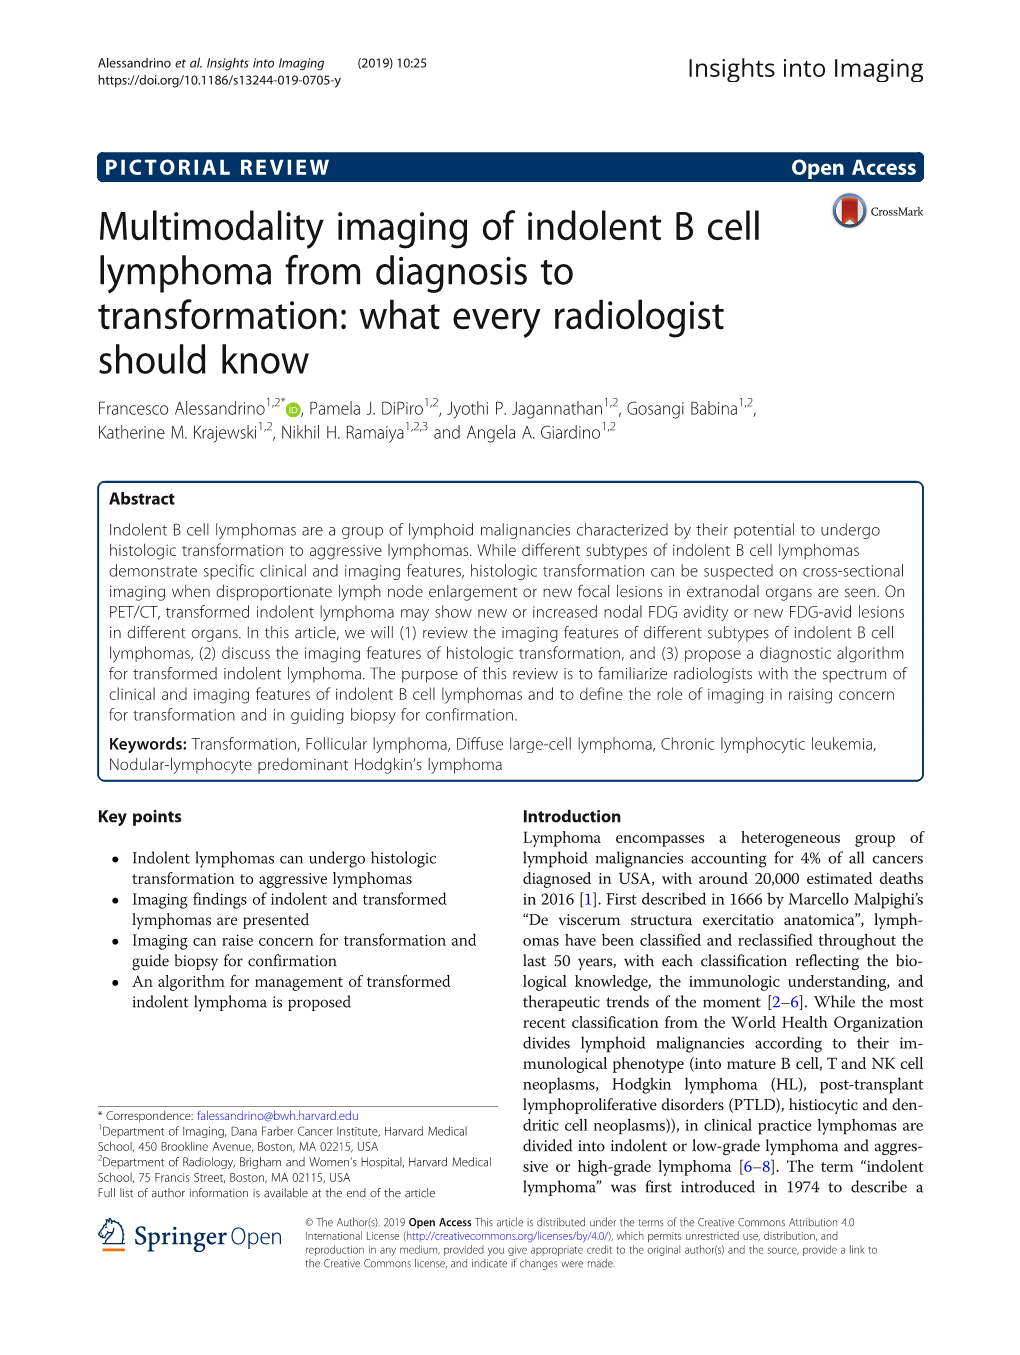 Multimodality Imaging of Indolent B Cell Lymphoma from Diagnosis to Transformation: What Every Radiologist Should Know Francesco Alessandrino1,2* , Pamela J